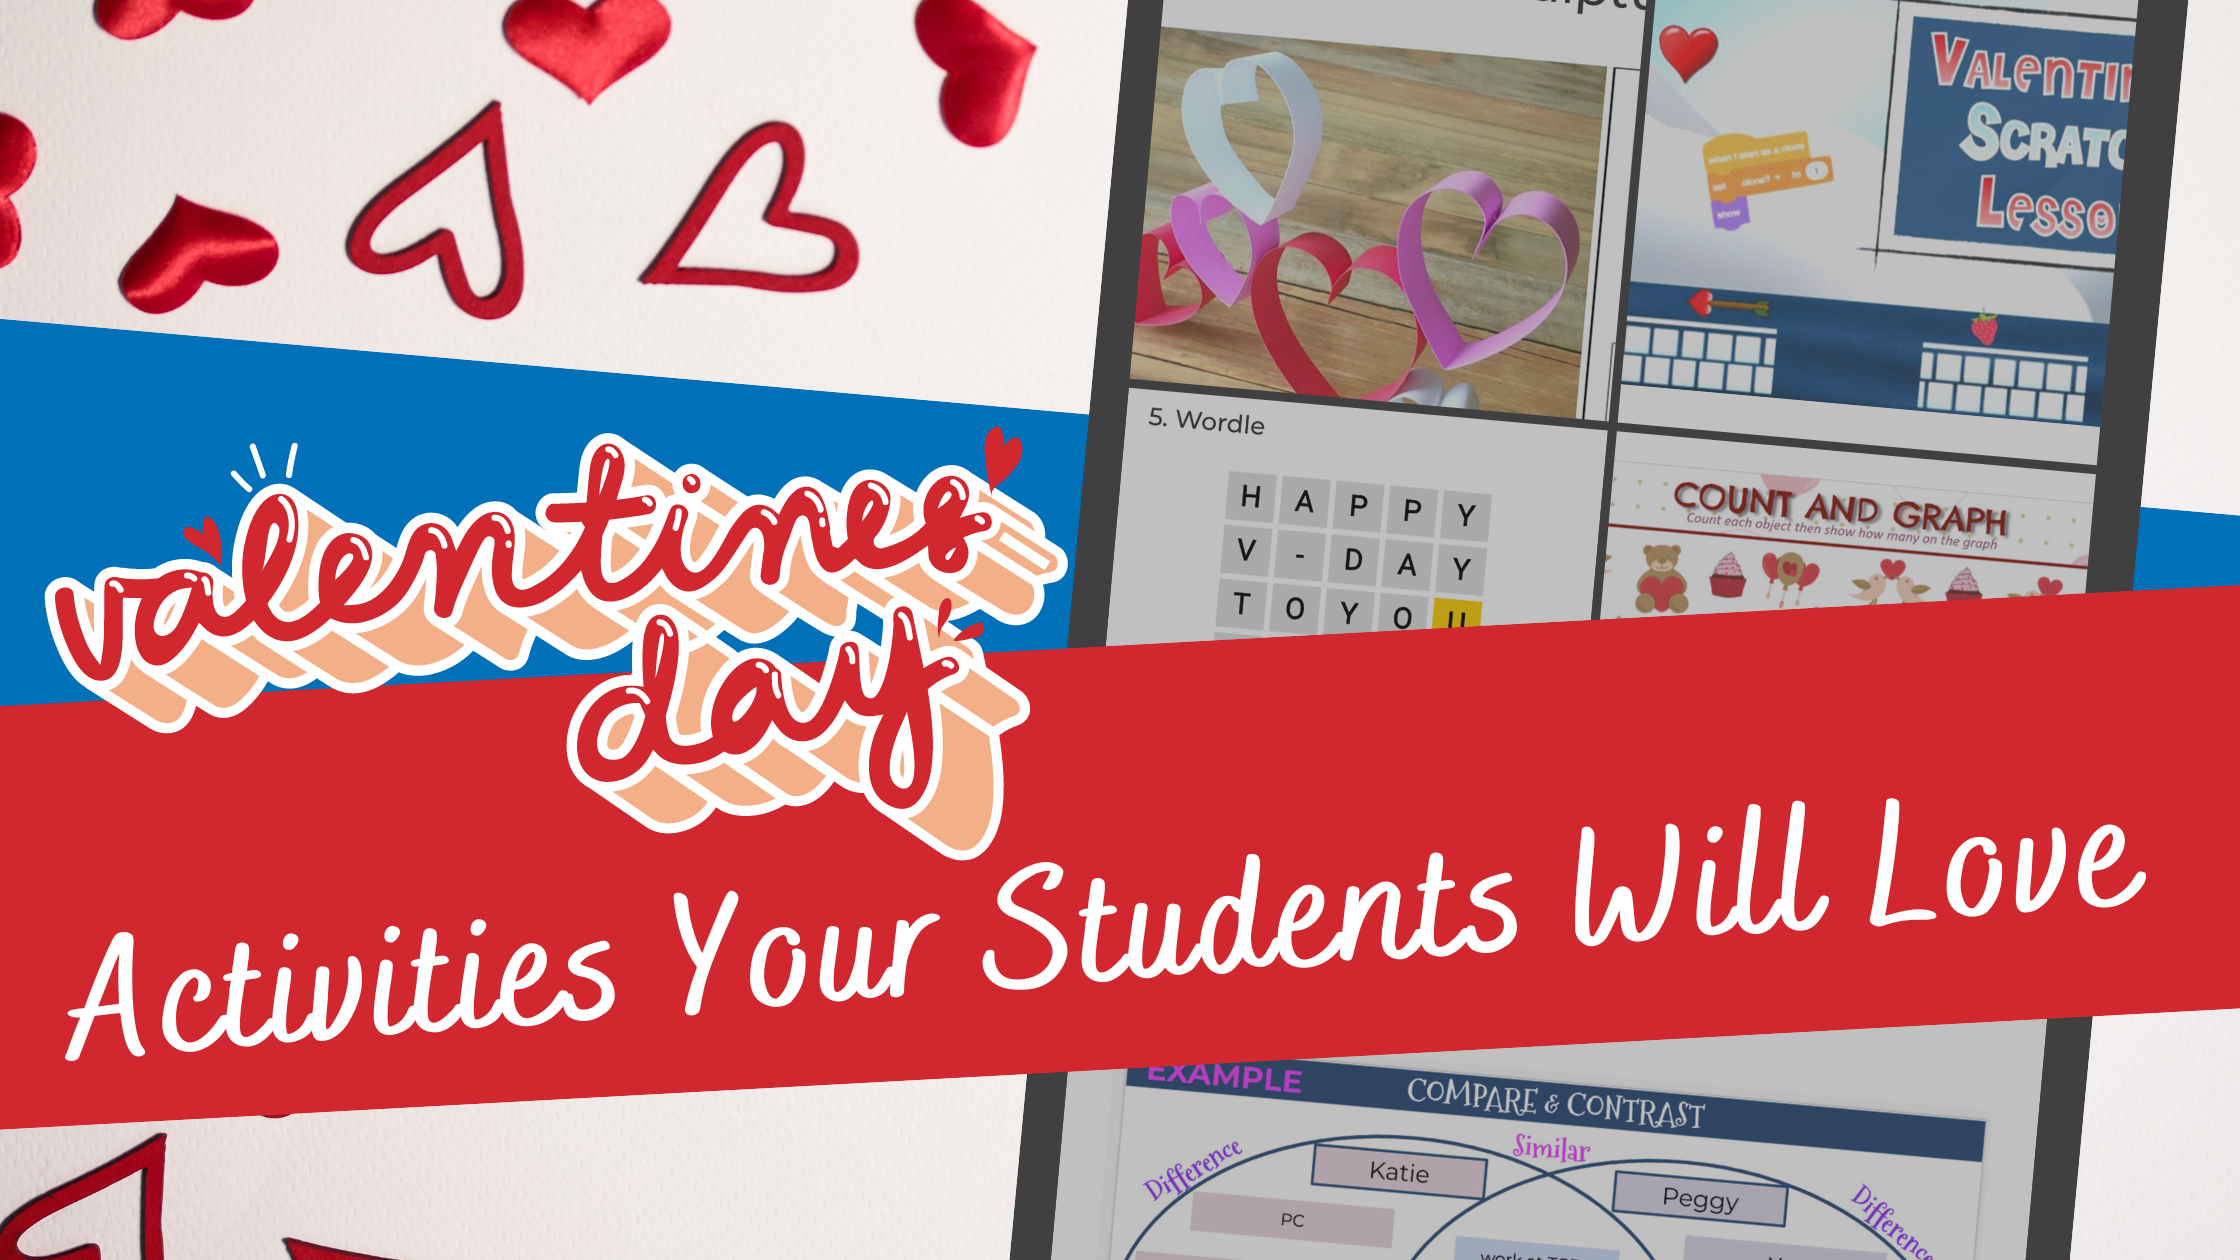 Top 5 Valentine's Day Activities for the physical and virtual Classroom